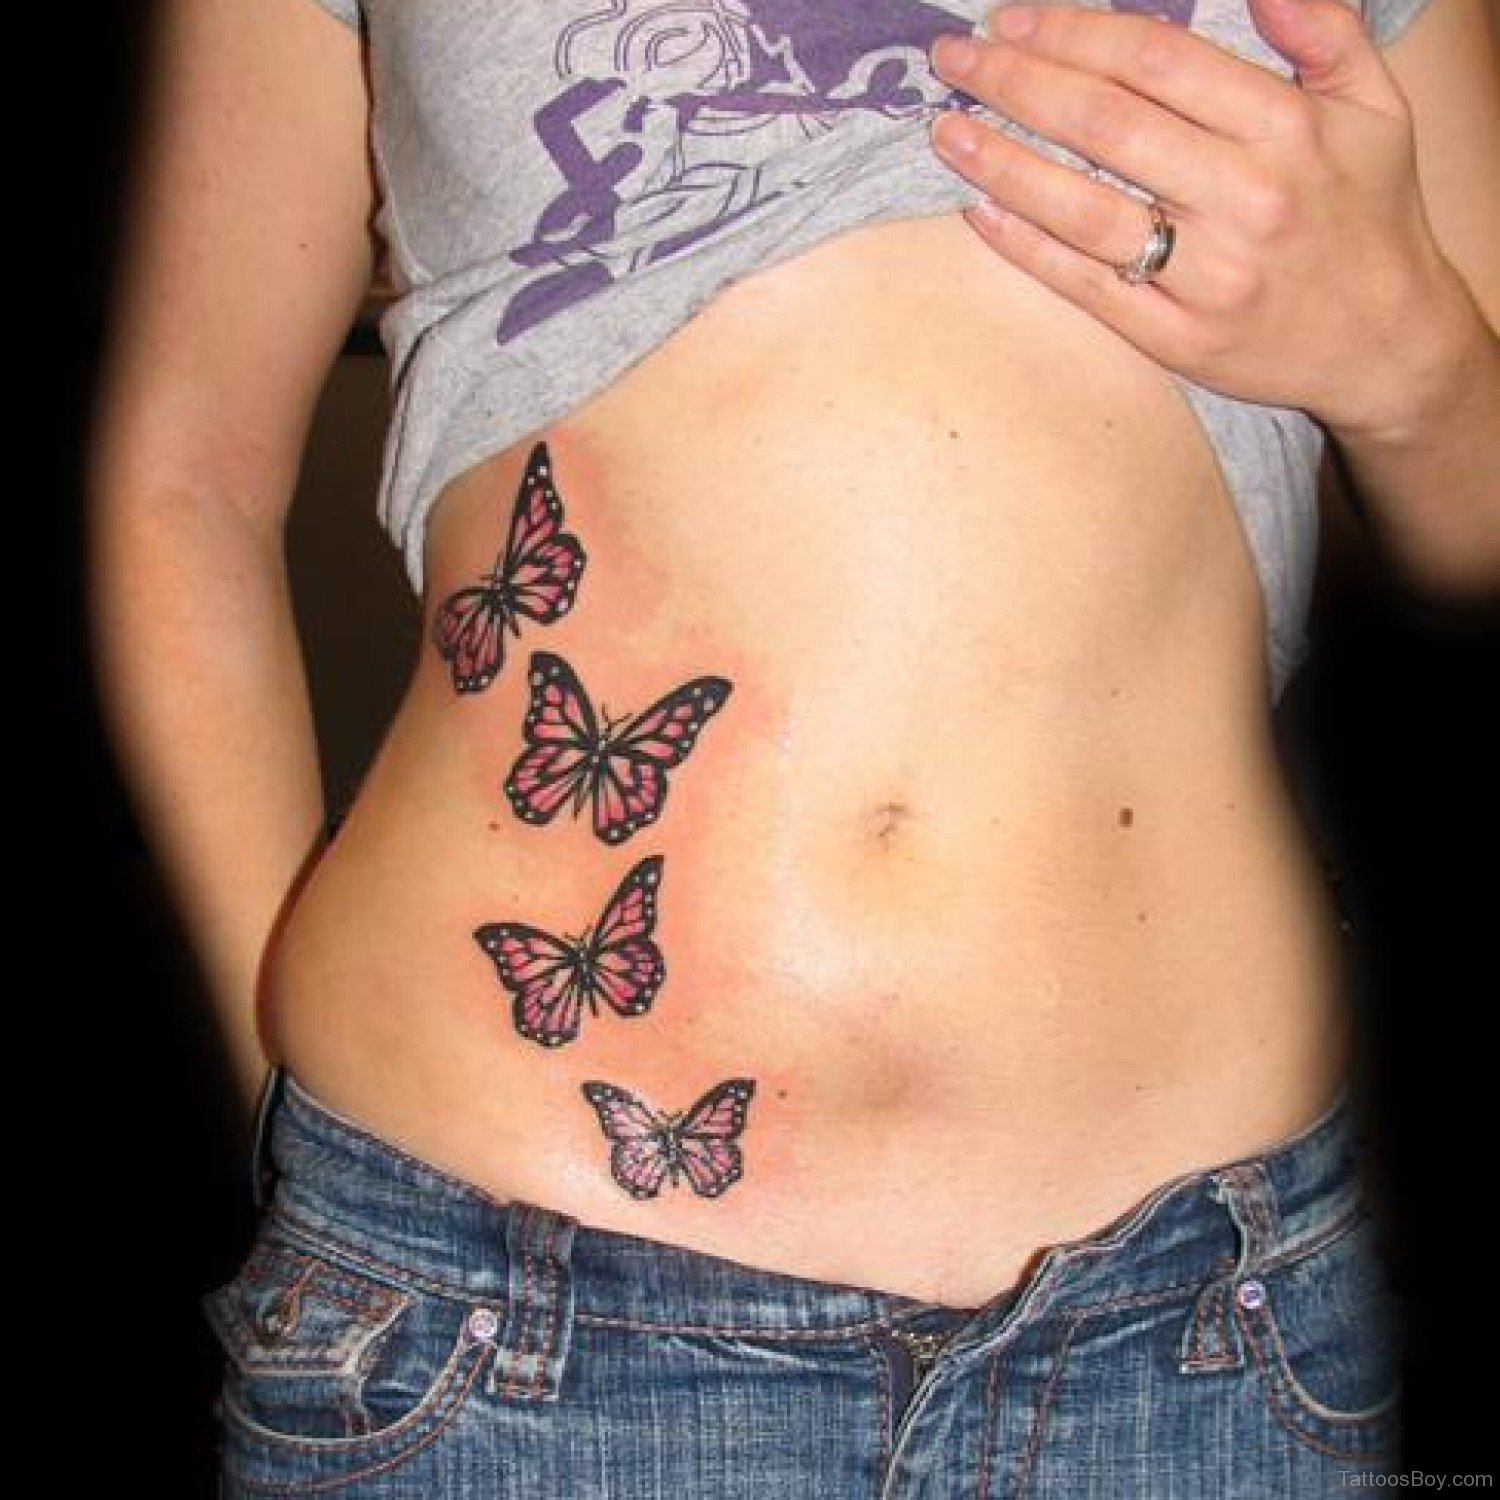 Butterfly Tattoo Design On Stomach Tattoo Designs Tattoo Pictures throughout proportions 1500 X 1500